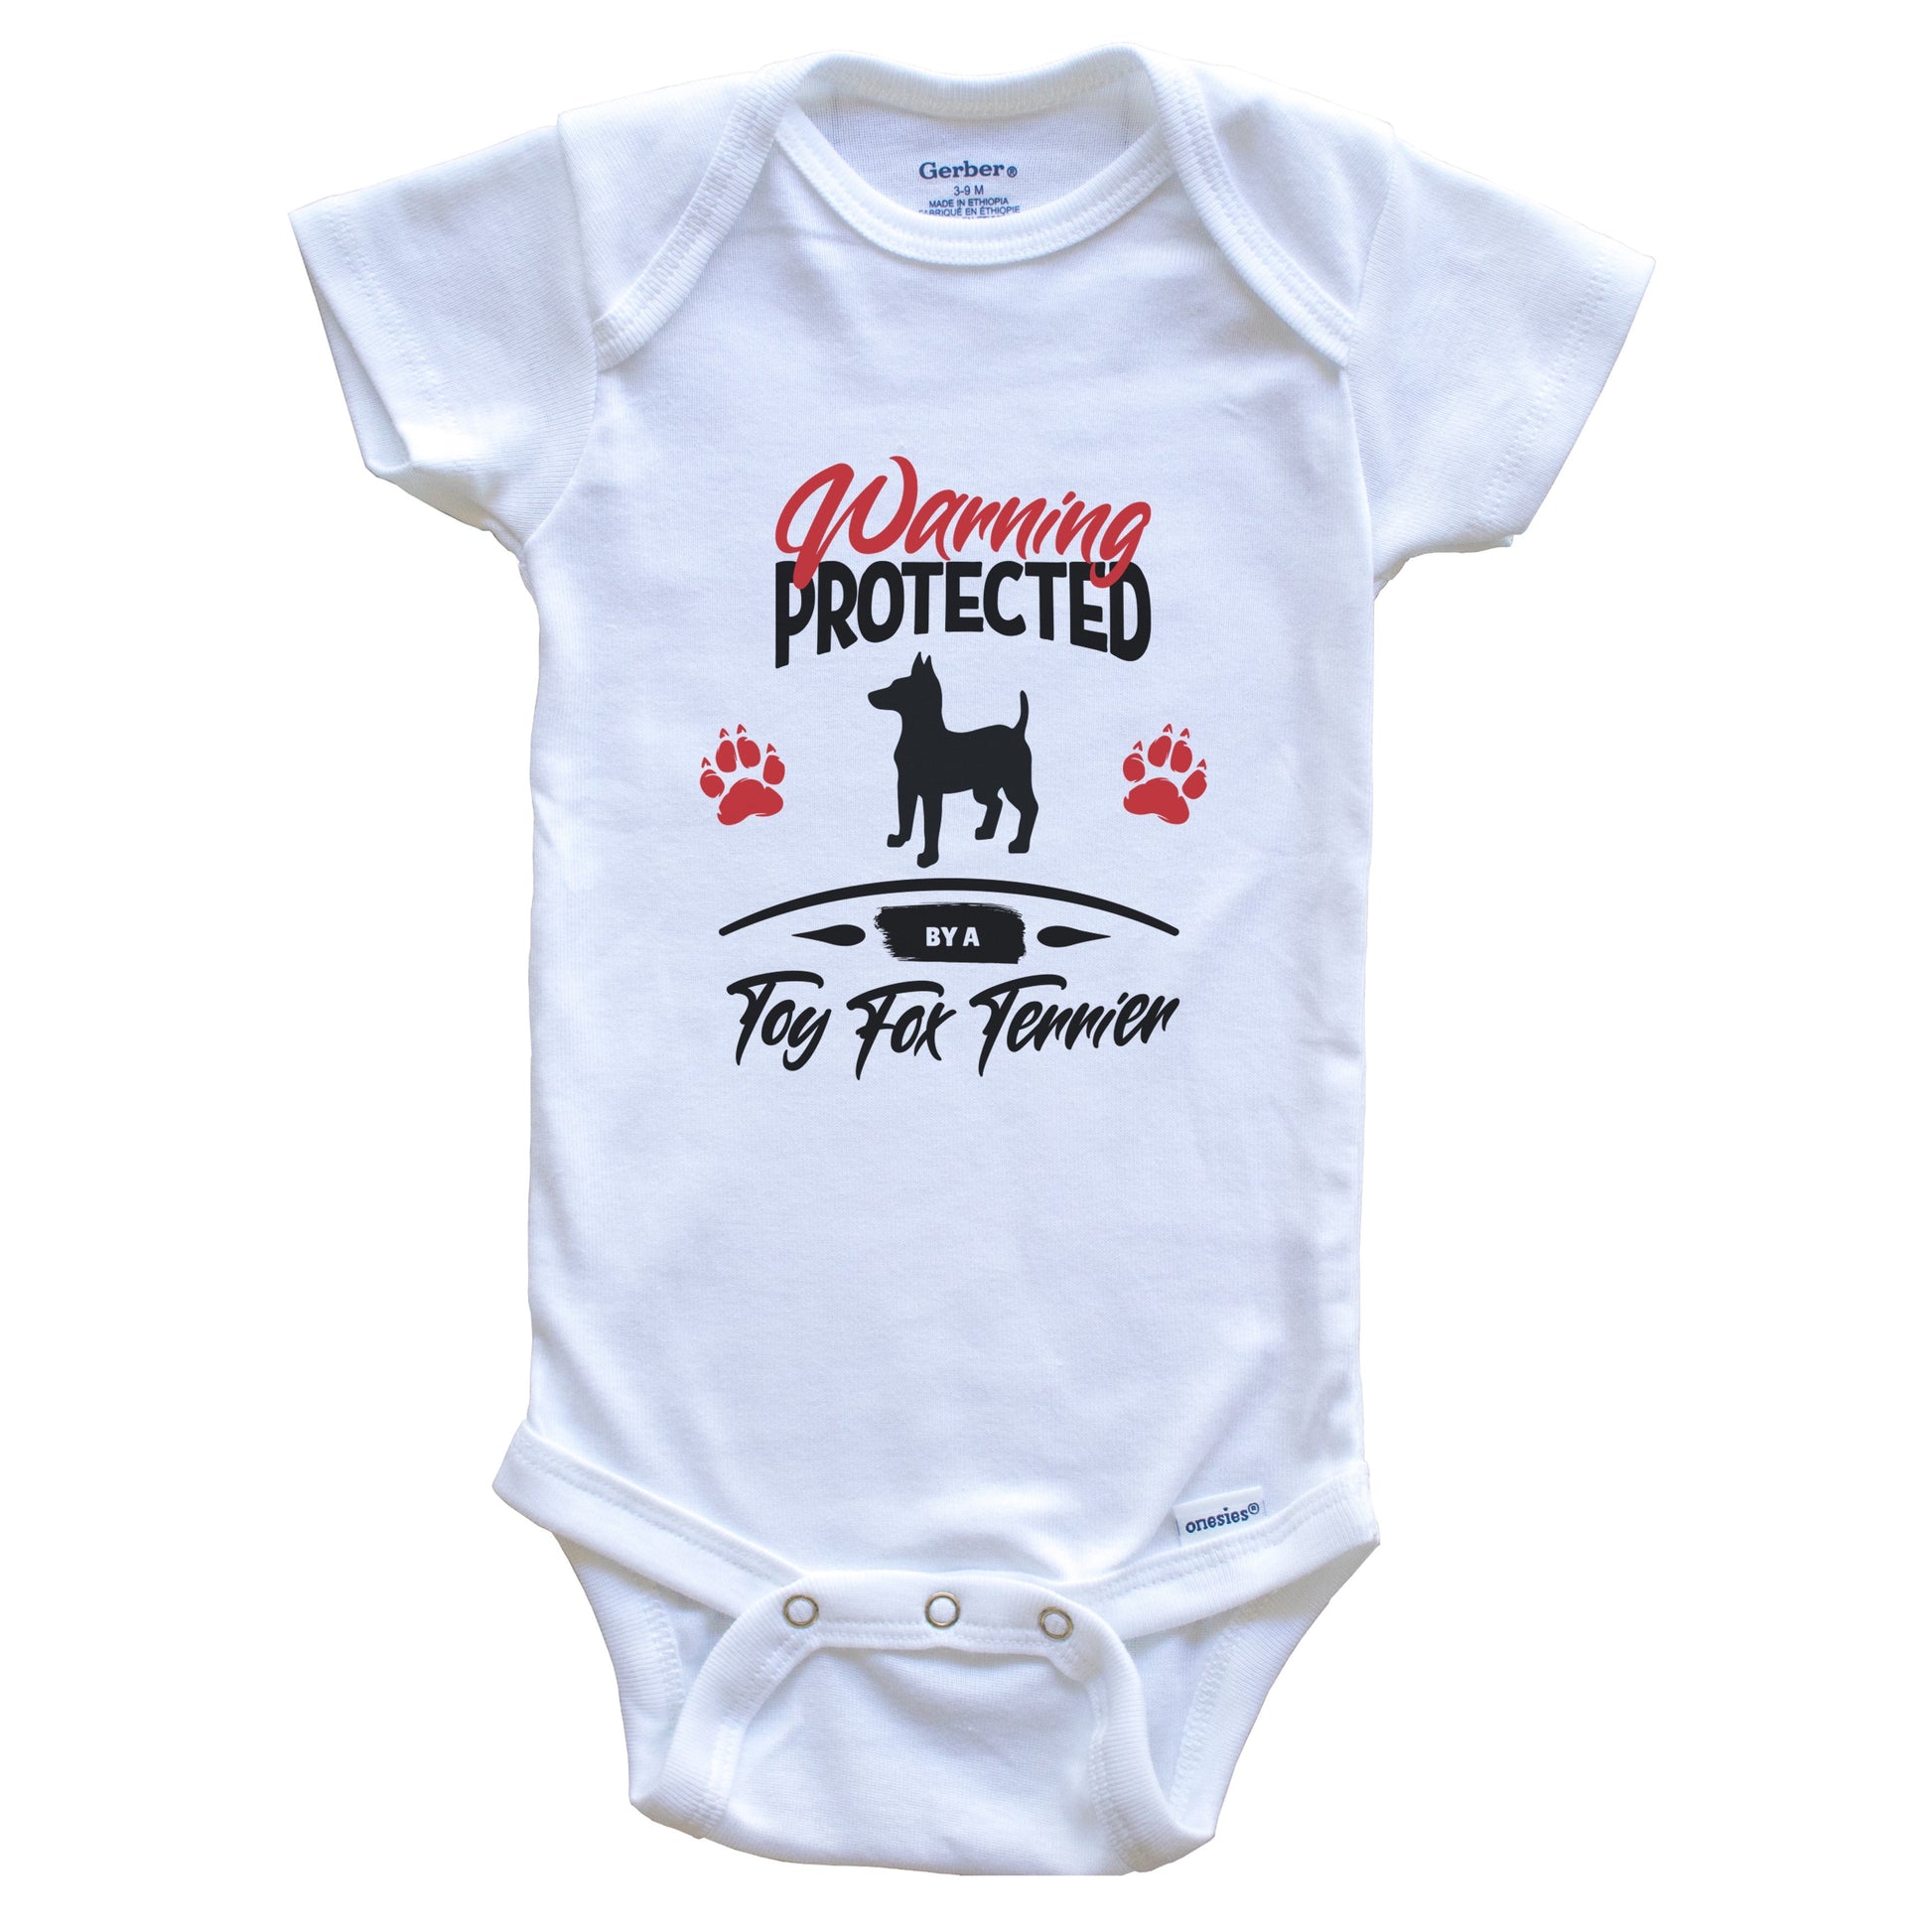 Warning Protected By A Toy Fox Terrier Funny Dog Owner Baby Bodysuit